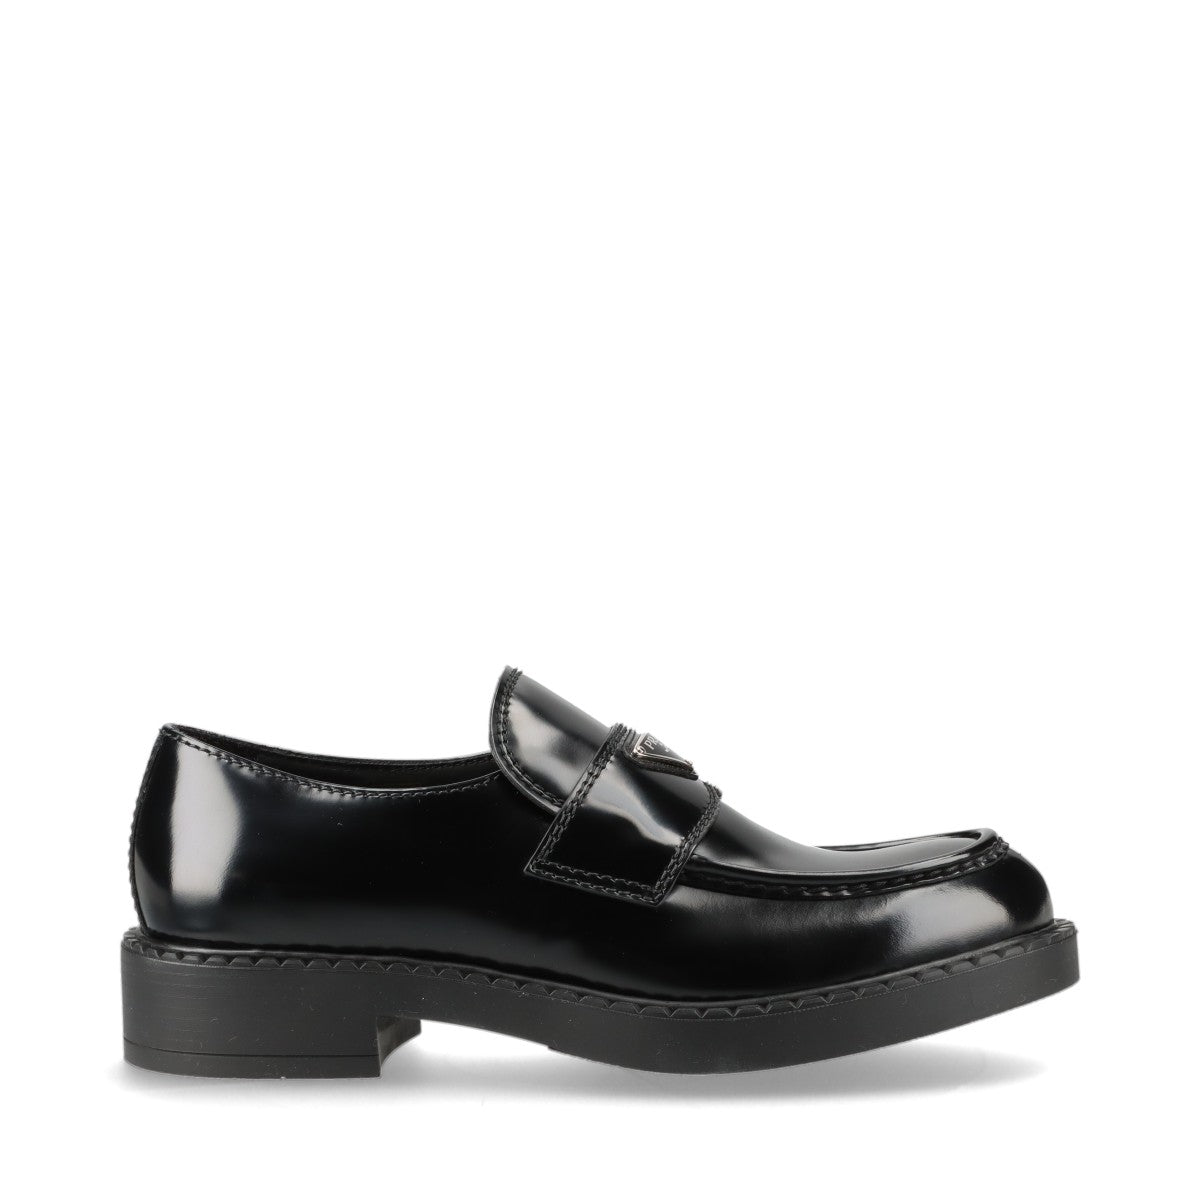 Prada Chocolate brushed leather Loafer 9 Men's Black 2DE127 Triangle logo Box There is a storage bag